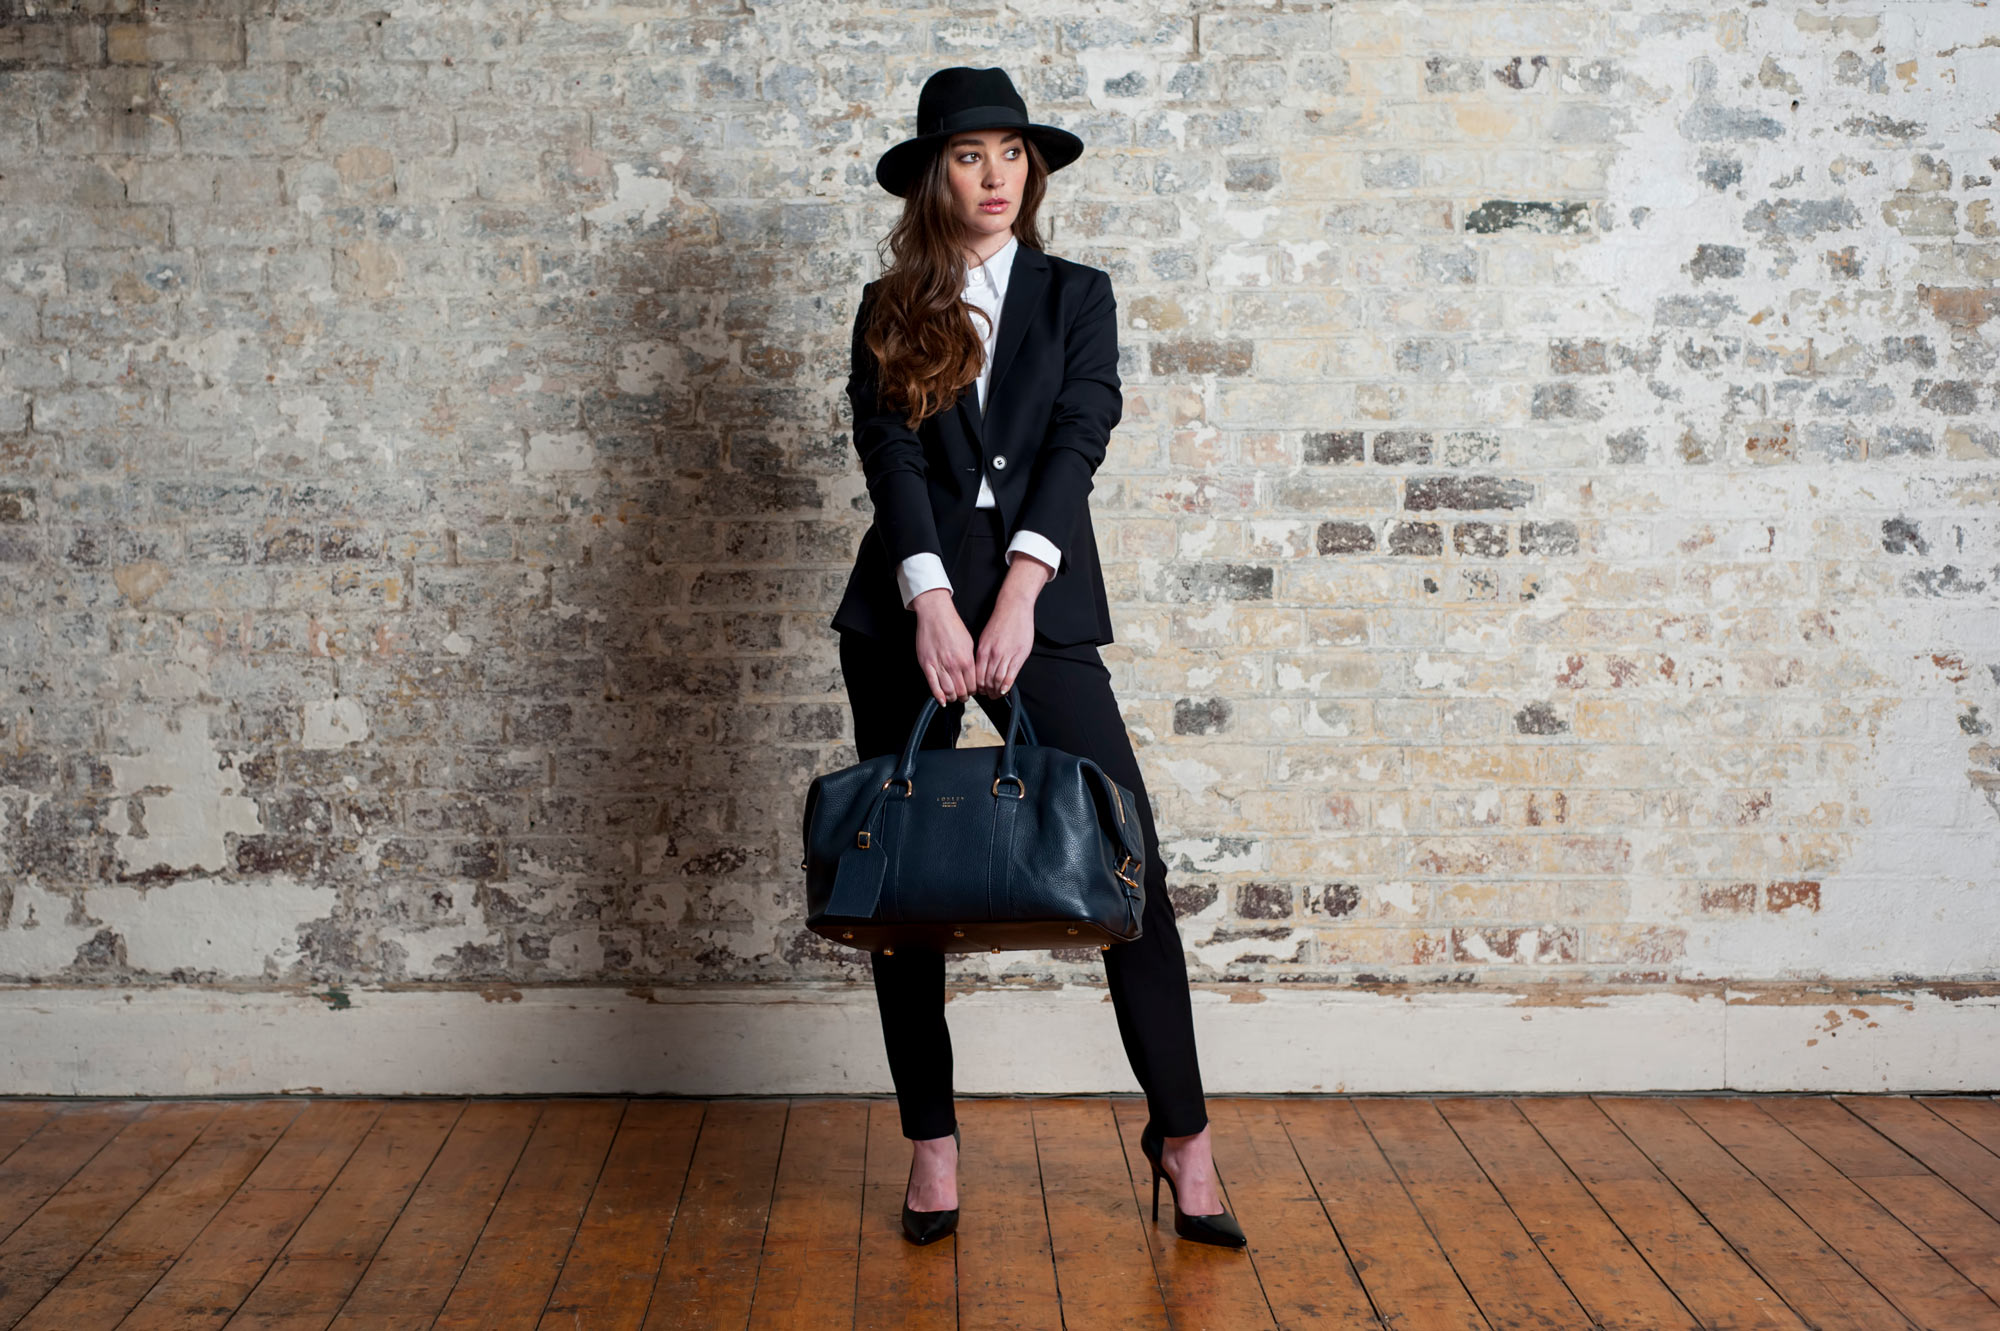 Model with bag by Loxley England